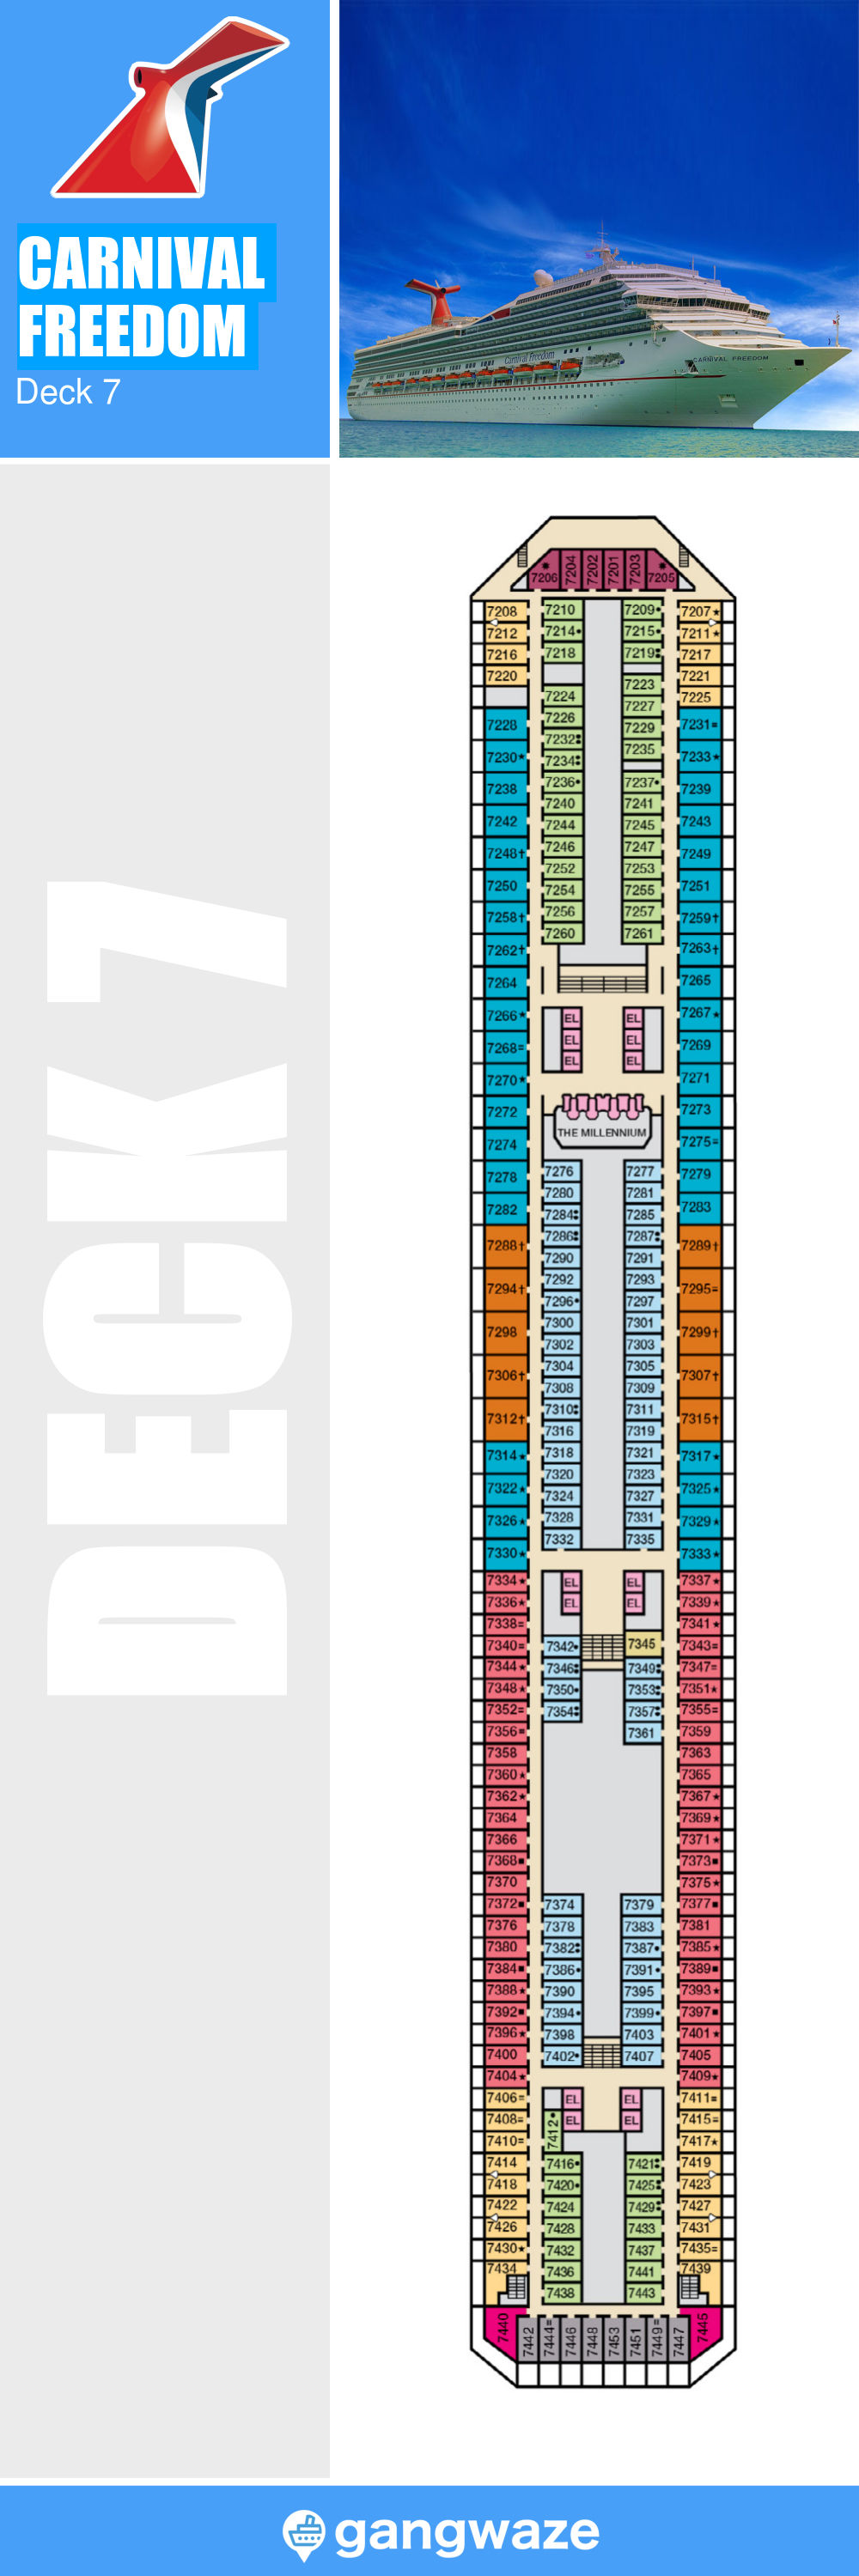 Carnival Freedom Deck 7 Activities & Deck Plan Layout